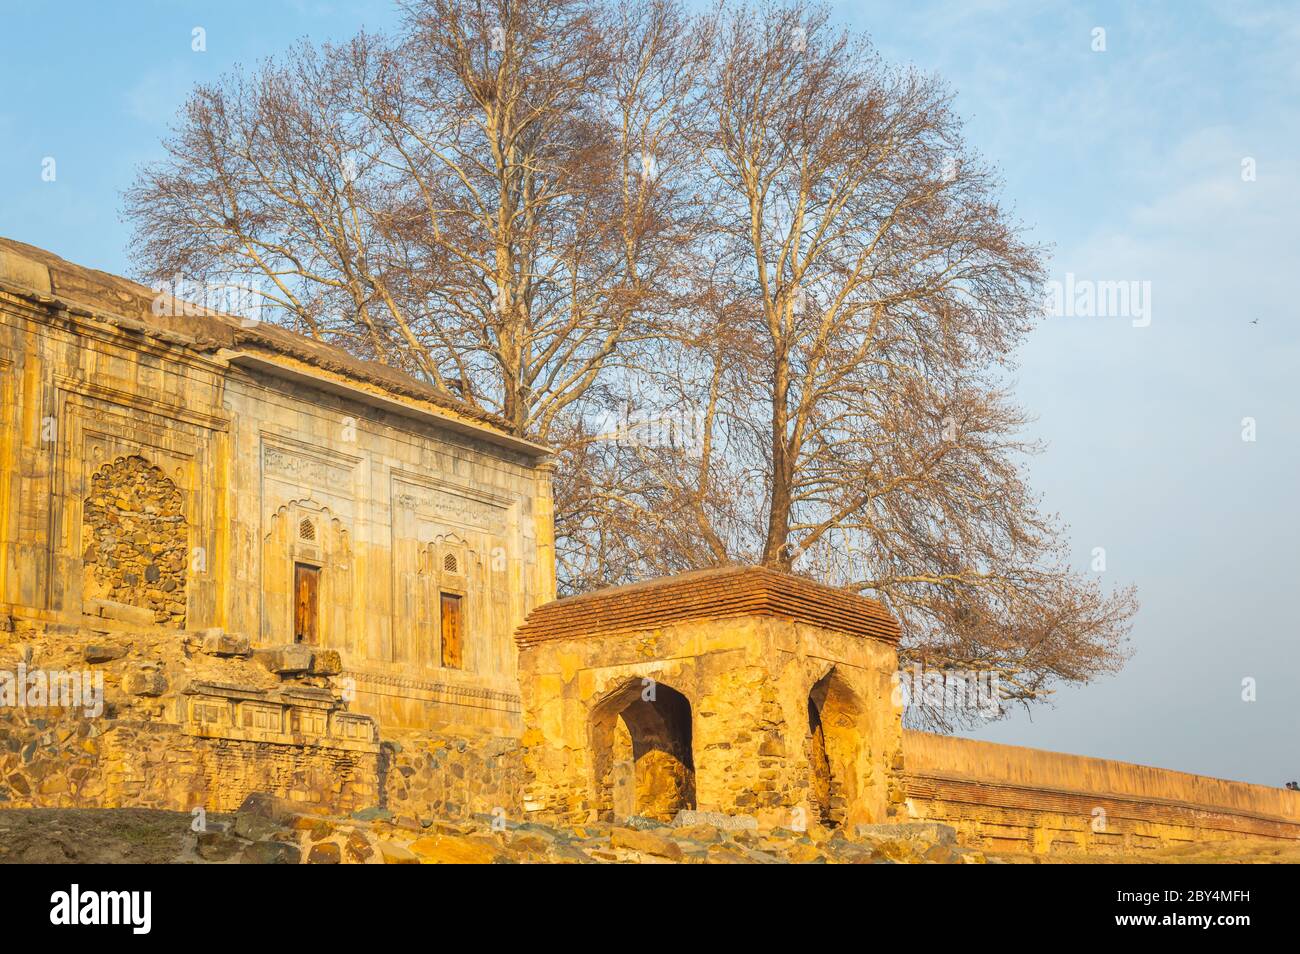 An old fort in Srinagar city with a Maple Tree in the background. Stock Photo